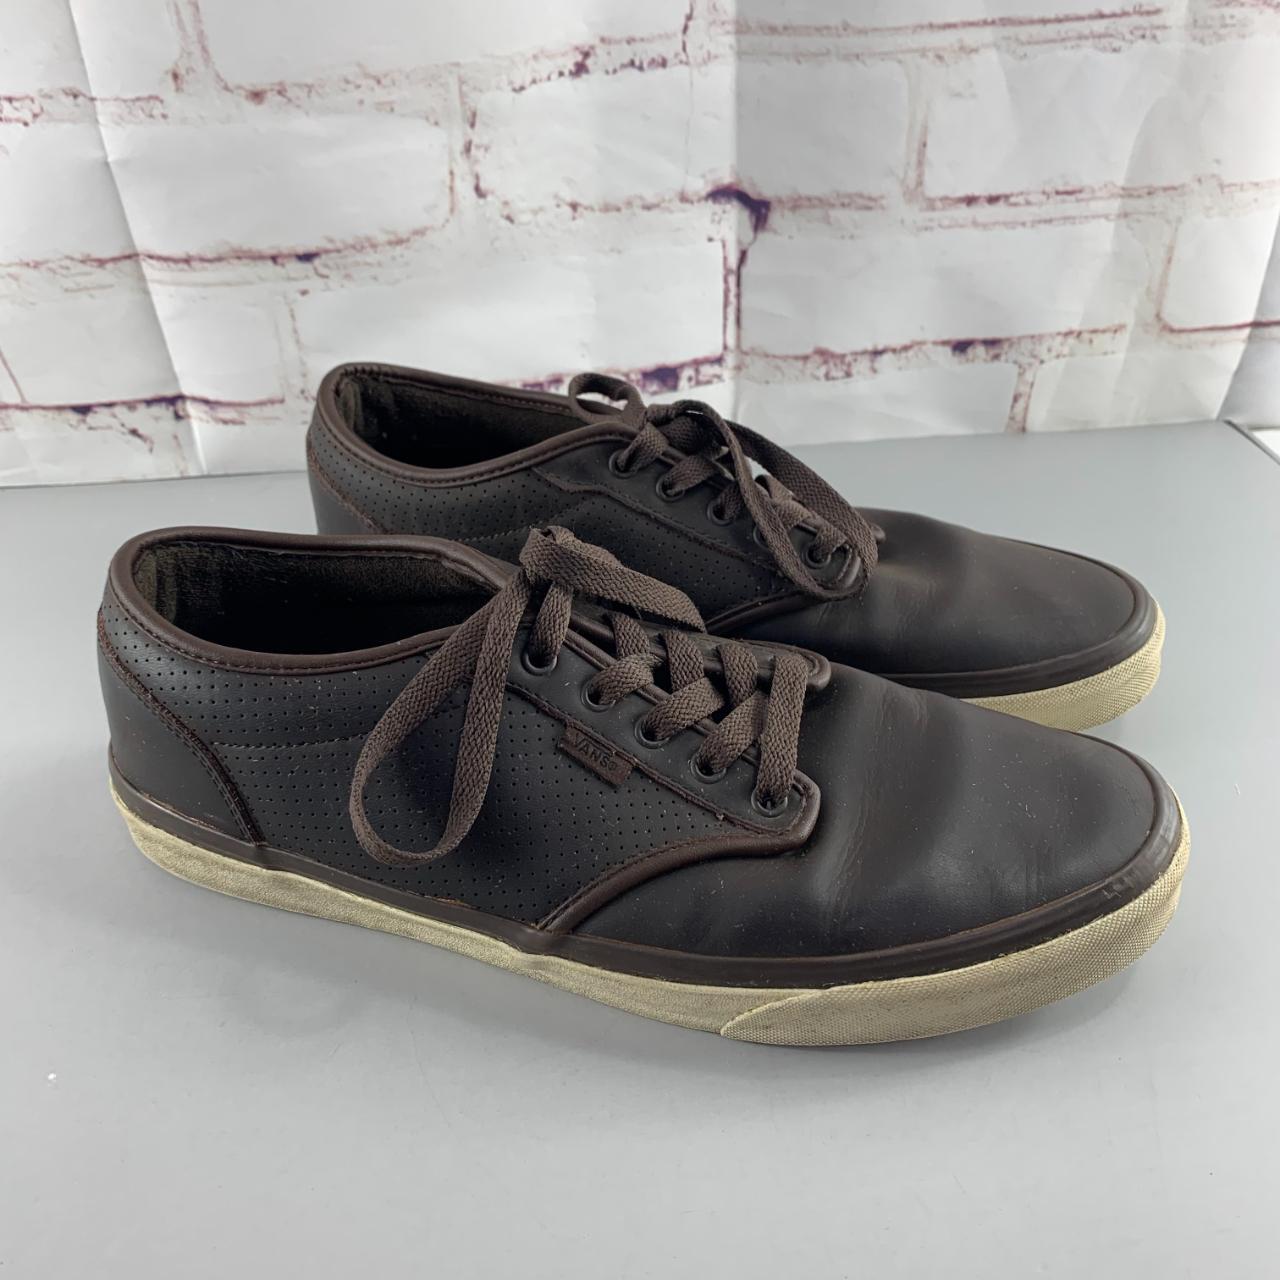 Vans Skate Shoes Brown Leather Size 13 Good Preowned... - Depop